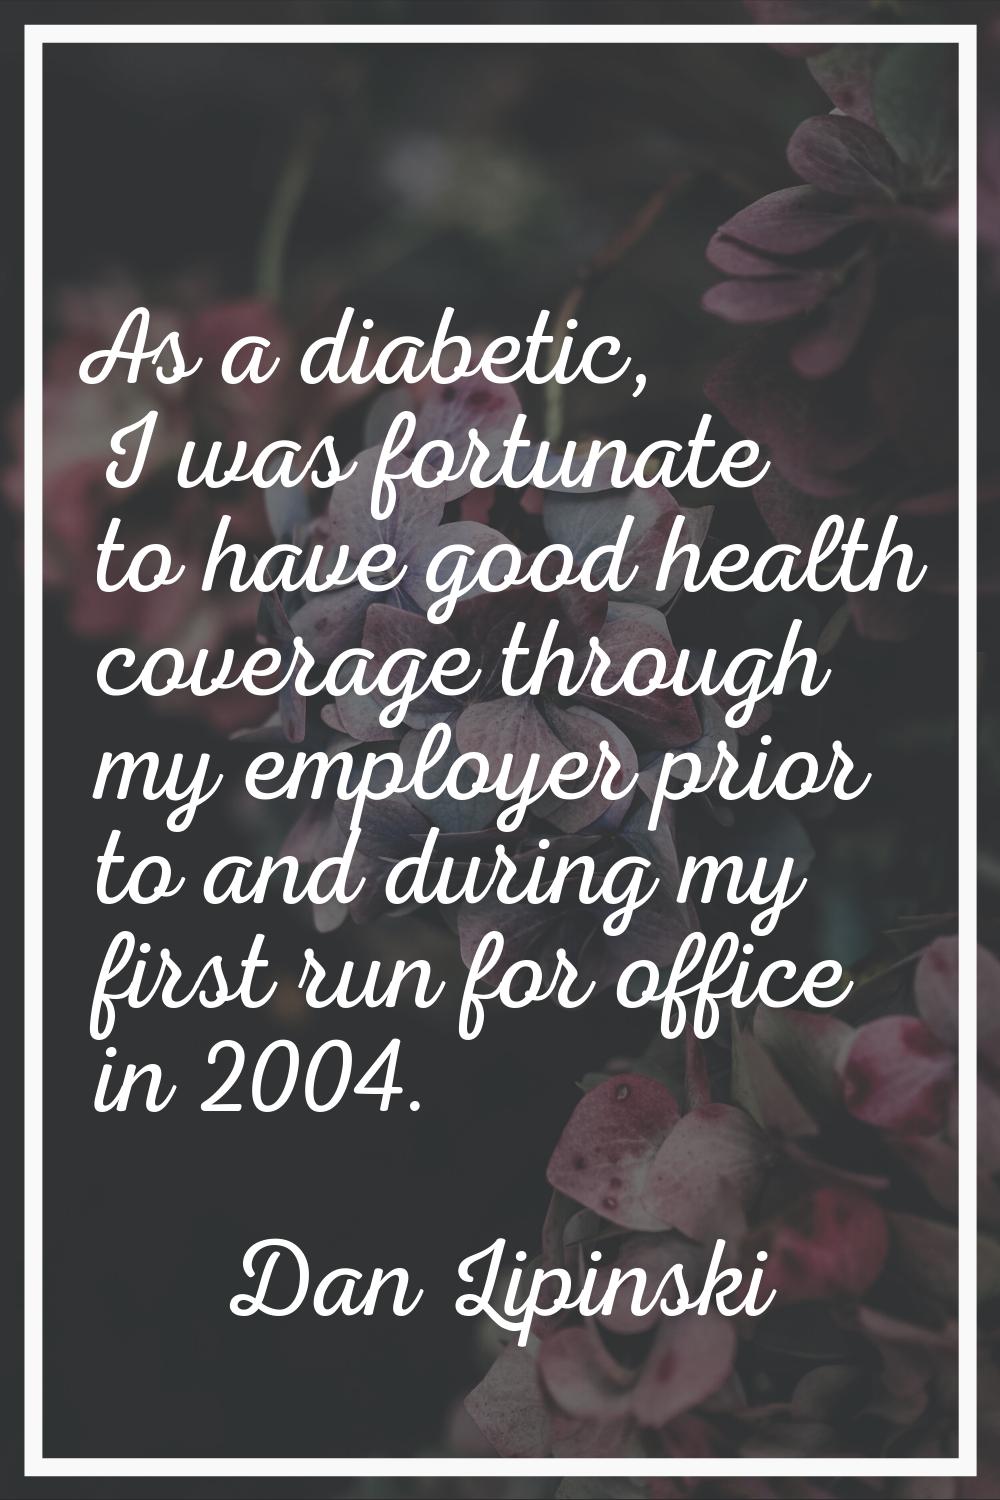 As a diabetic, I was fortunate to have good health coverage through my employer prior to and during